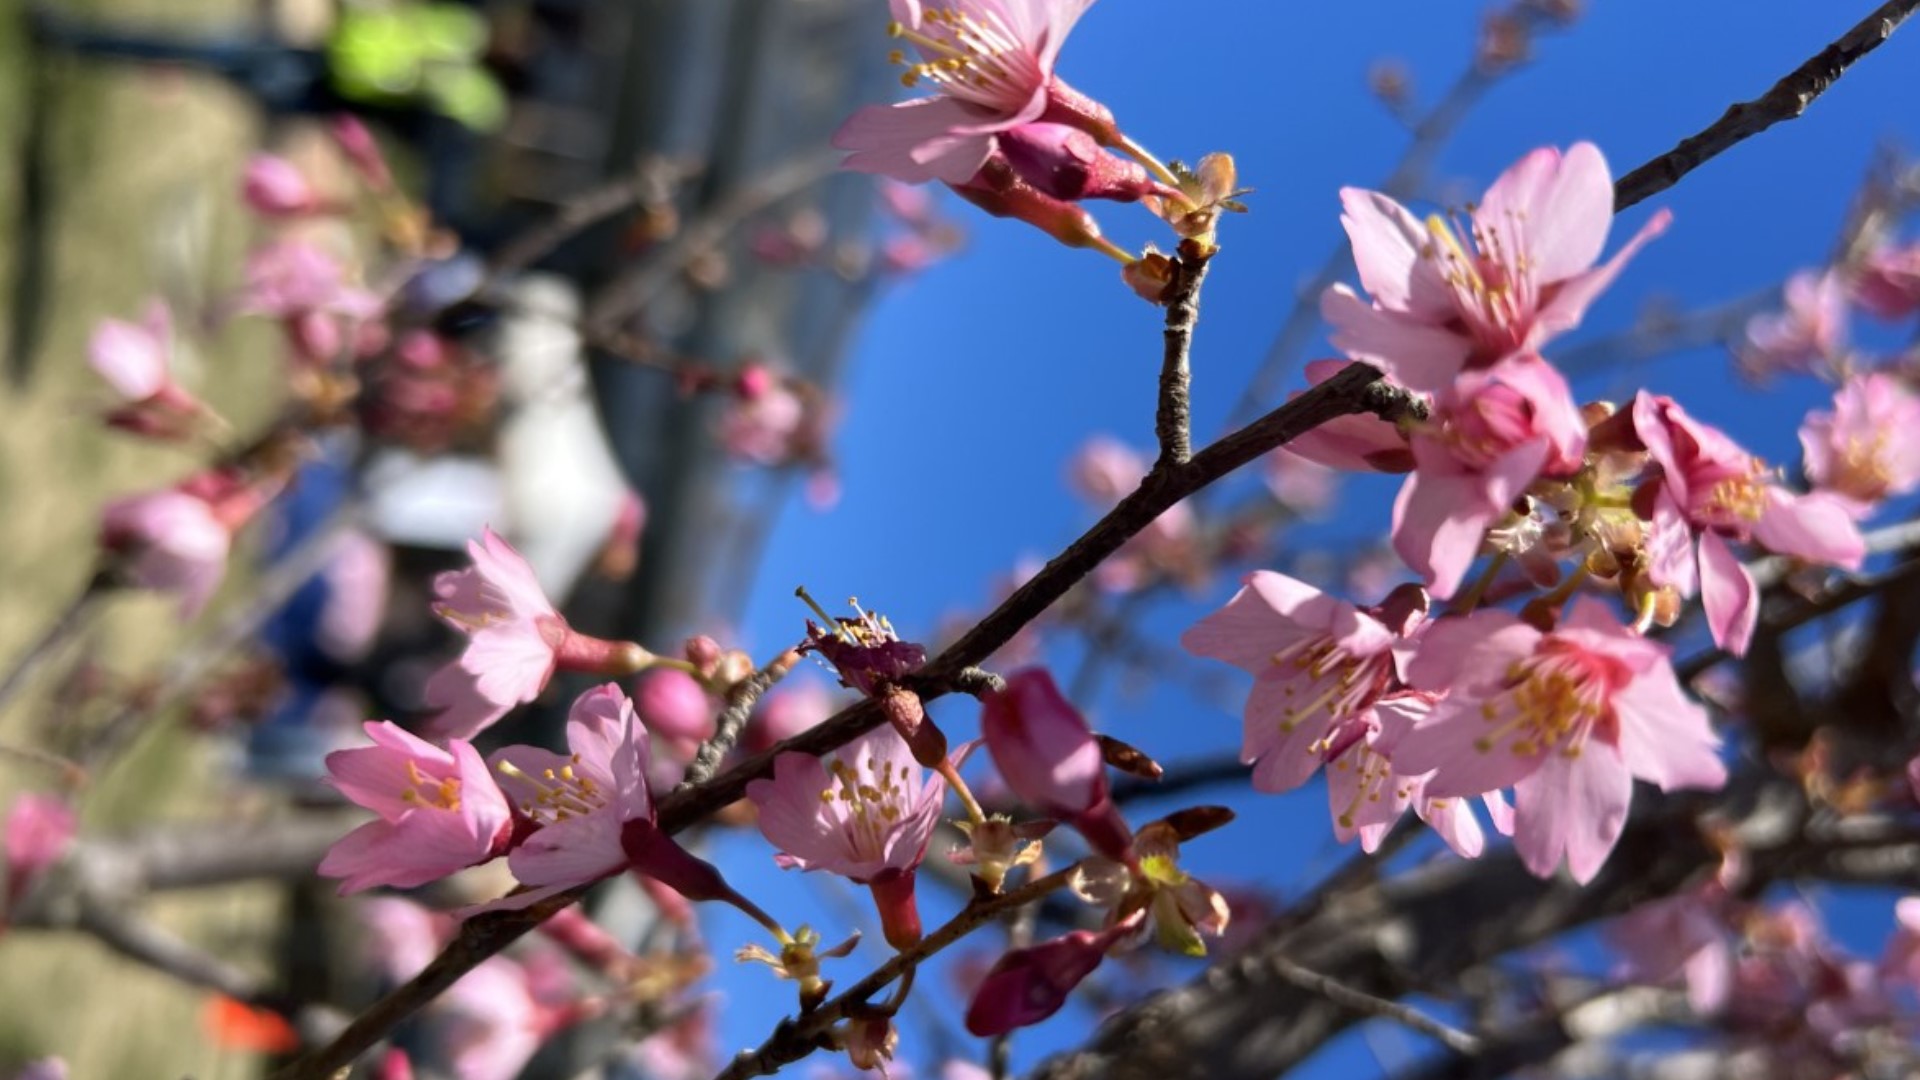 Brian Salley, of The St. Regis in Washington, DC, and Jeffery Morgan, of the Conrad Hotel Washington tell us the best spots in the city to view the cherry blossoms.